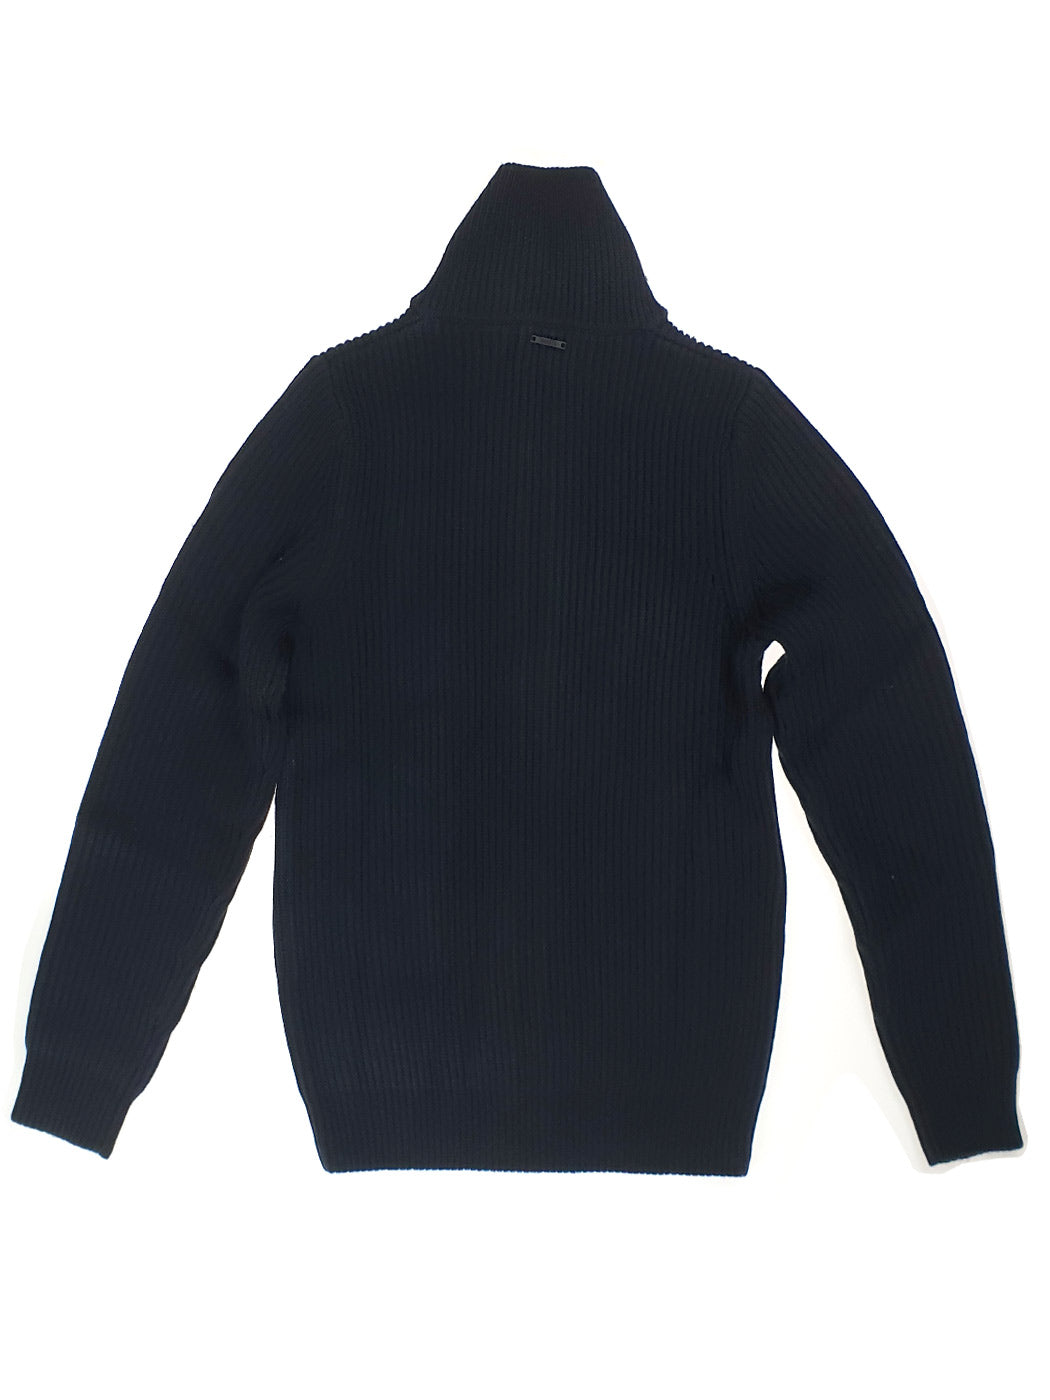 ANTONY MORATO Blue knitted sweater for boy - MKSW01262